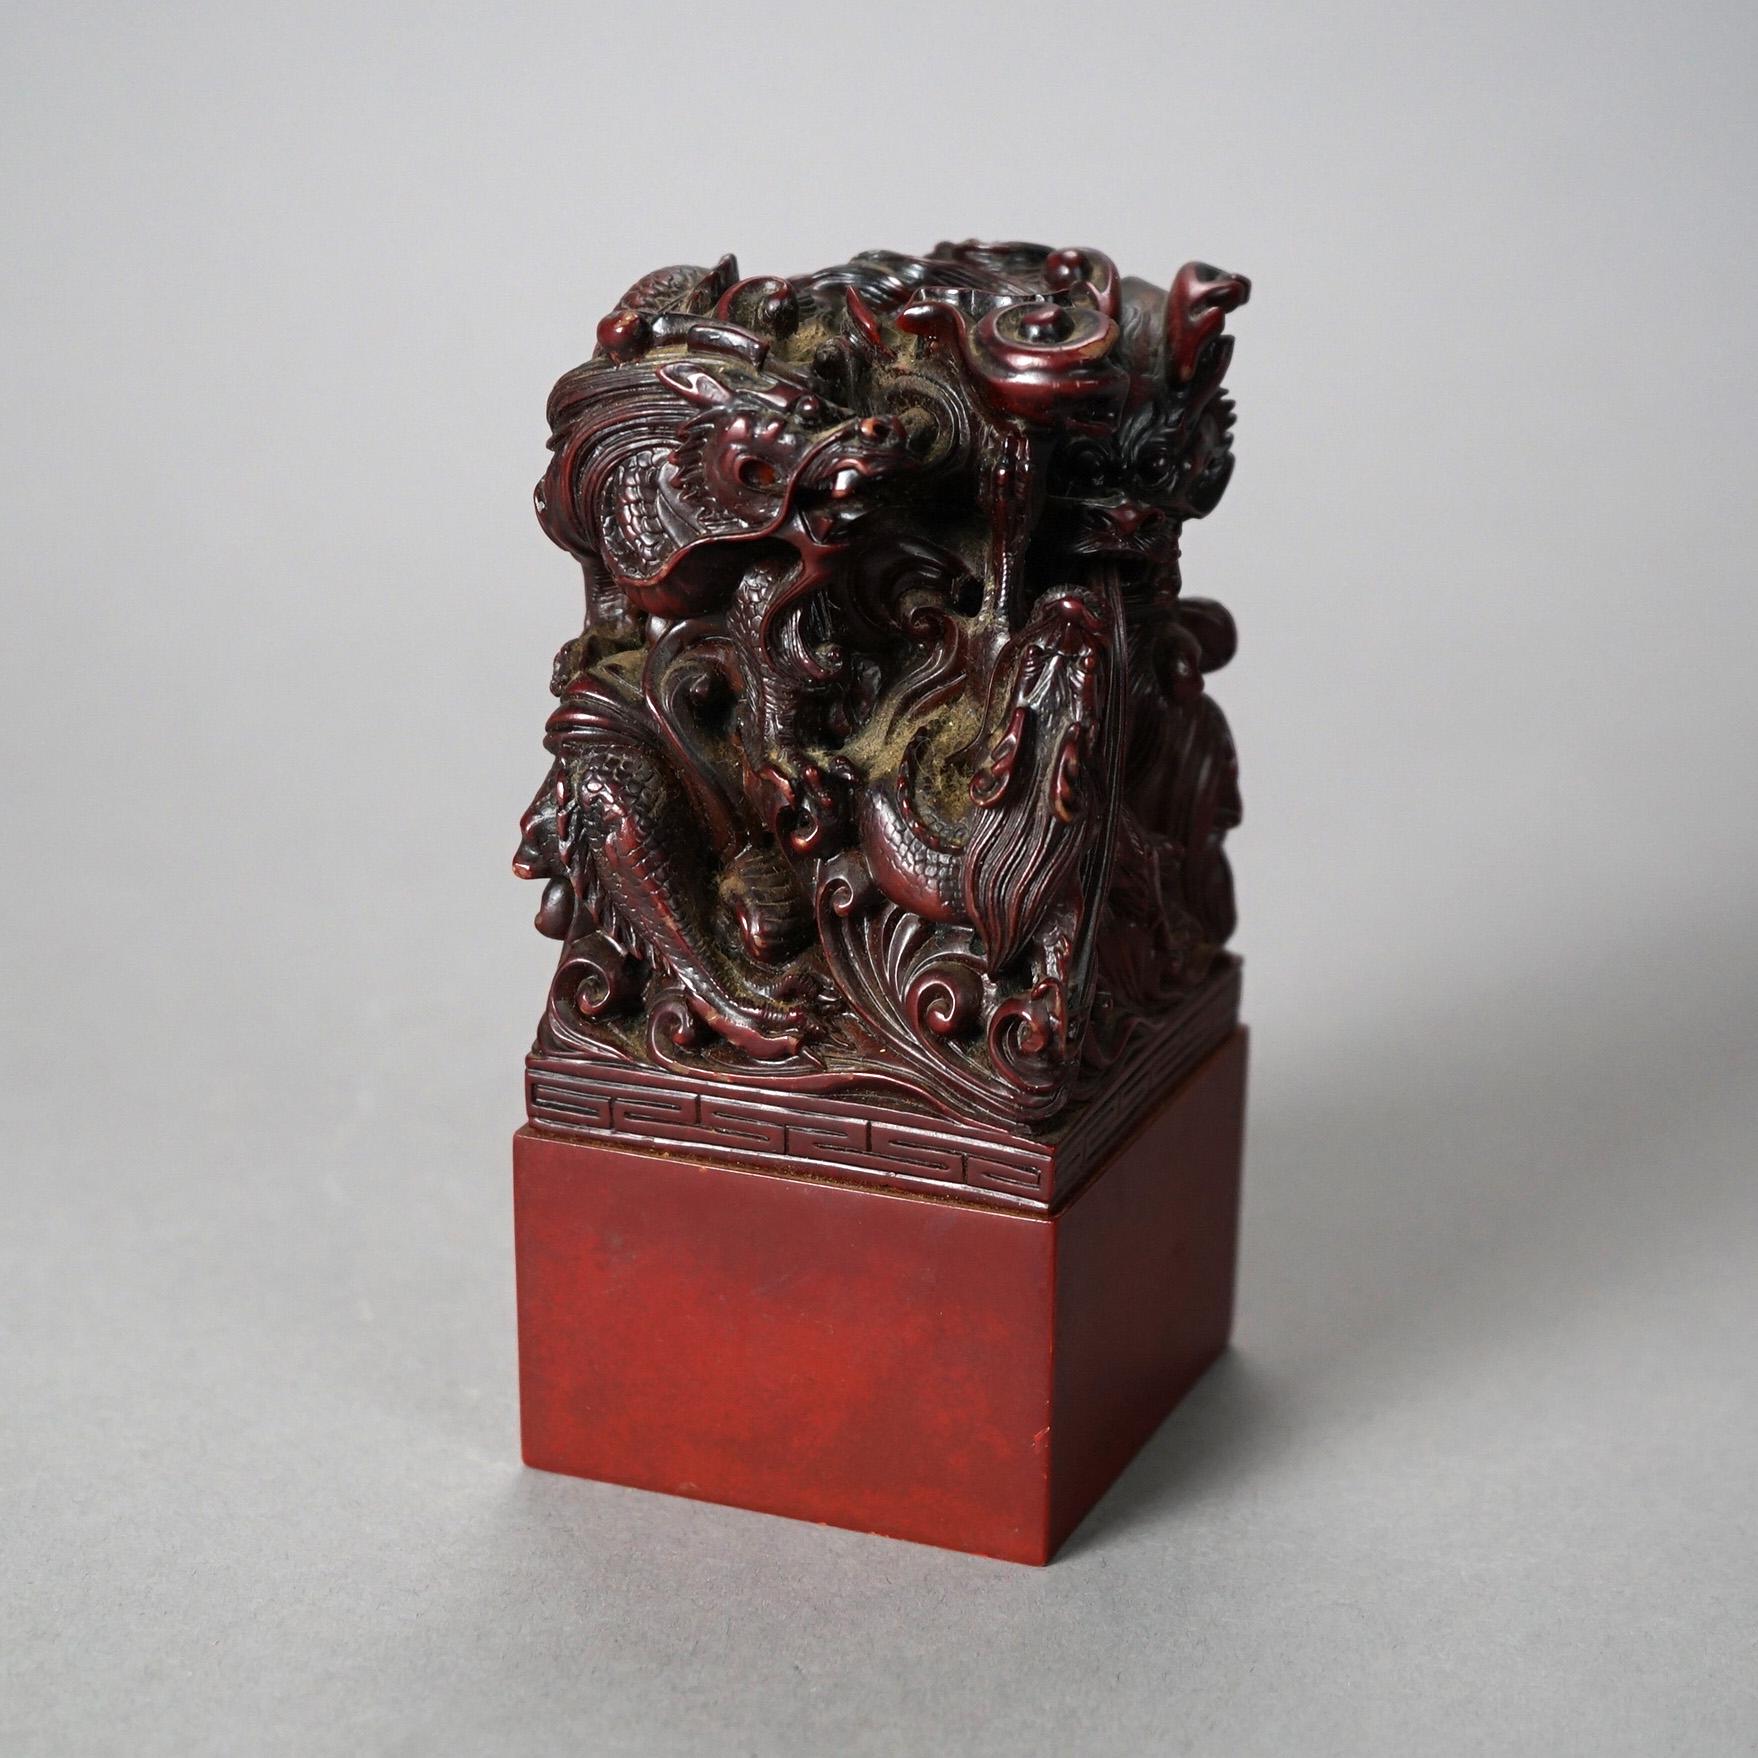 An antique Chinese figural group offers carved hardwood sculpture of intertwined dragons, circa 1920.

Measures - 5.5